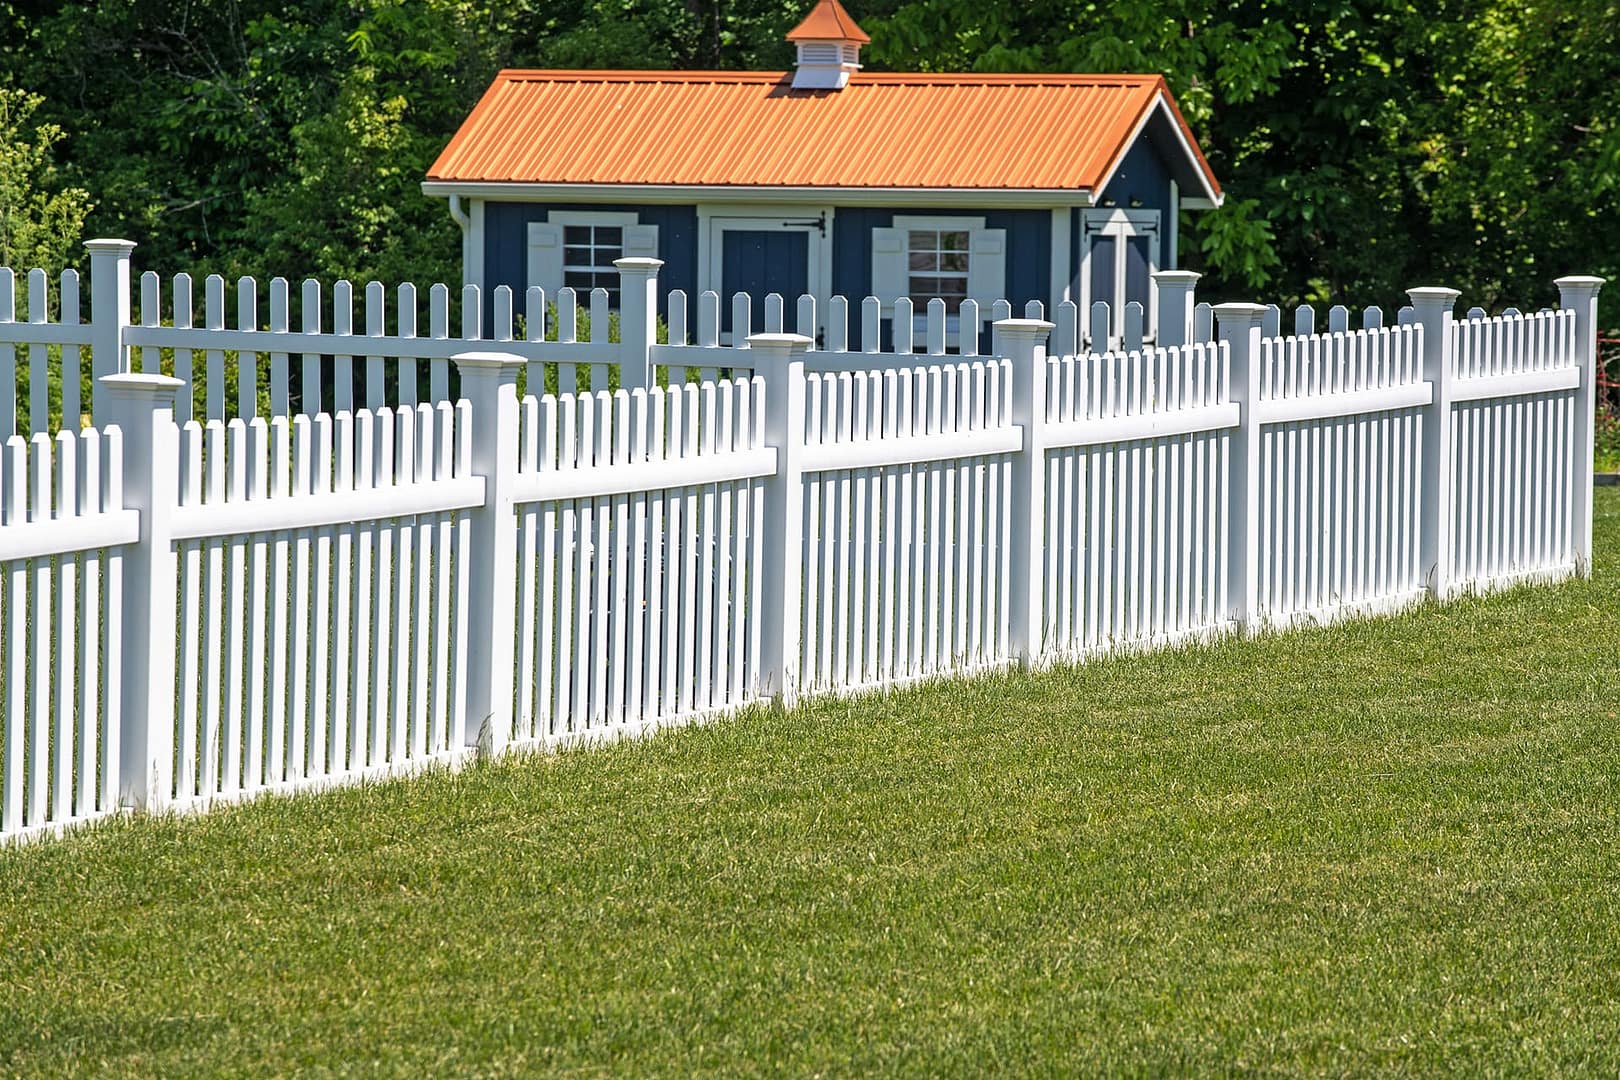 Element Fence Company will enlighten all homeowners about the truth with fencing in Leland, NC